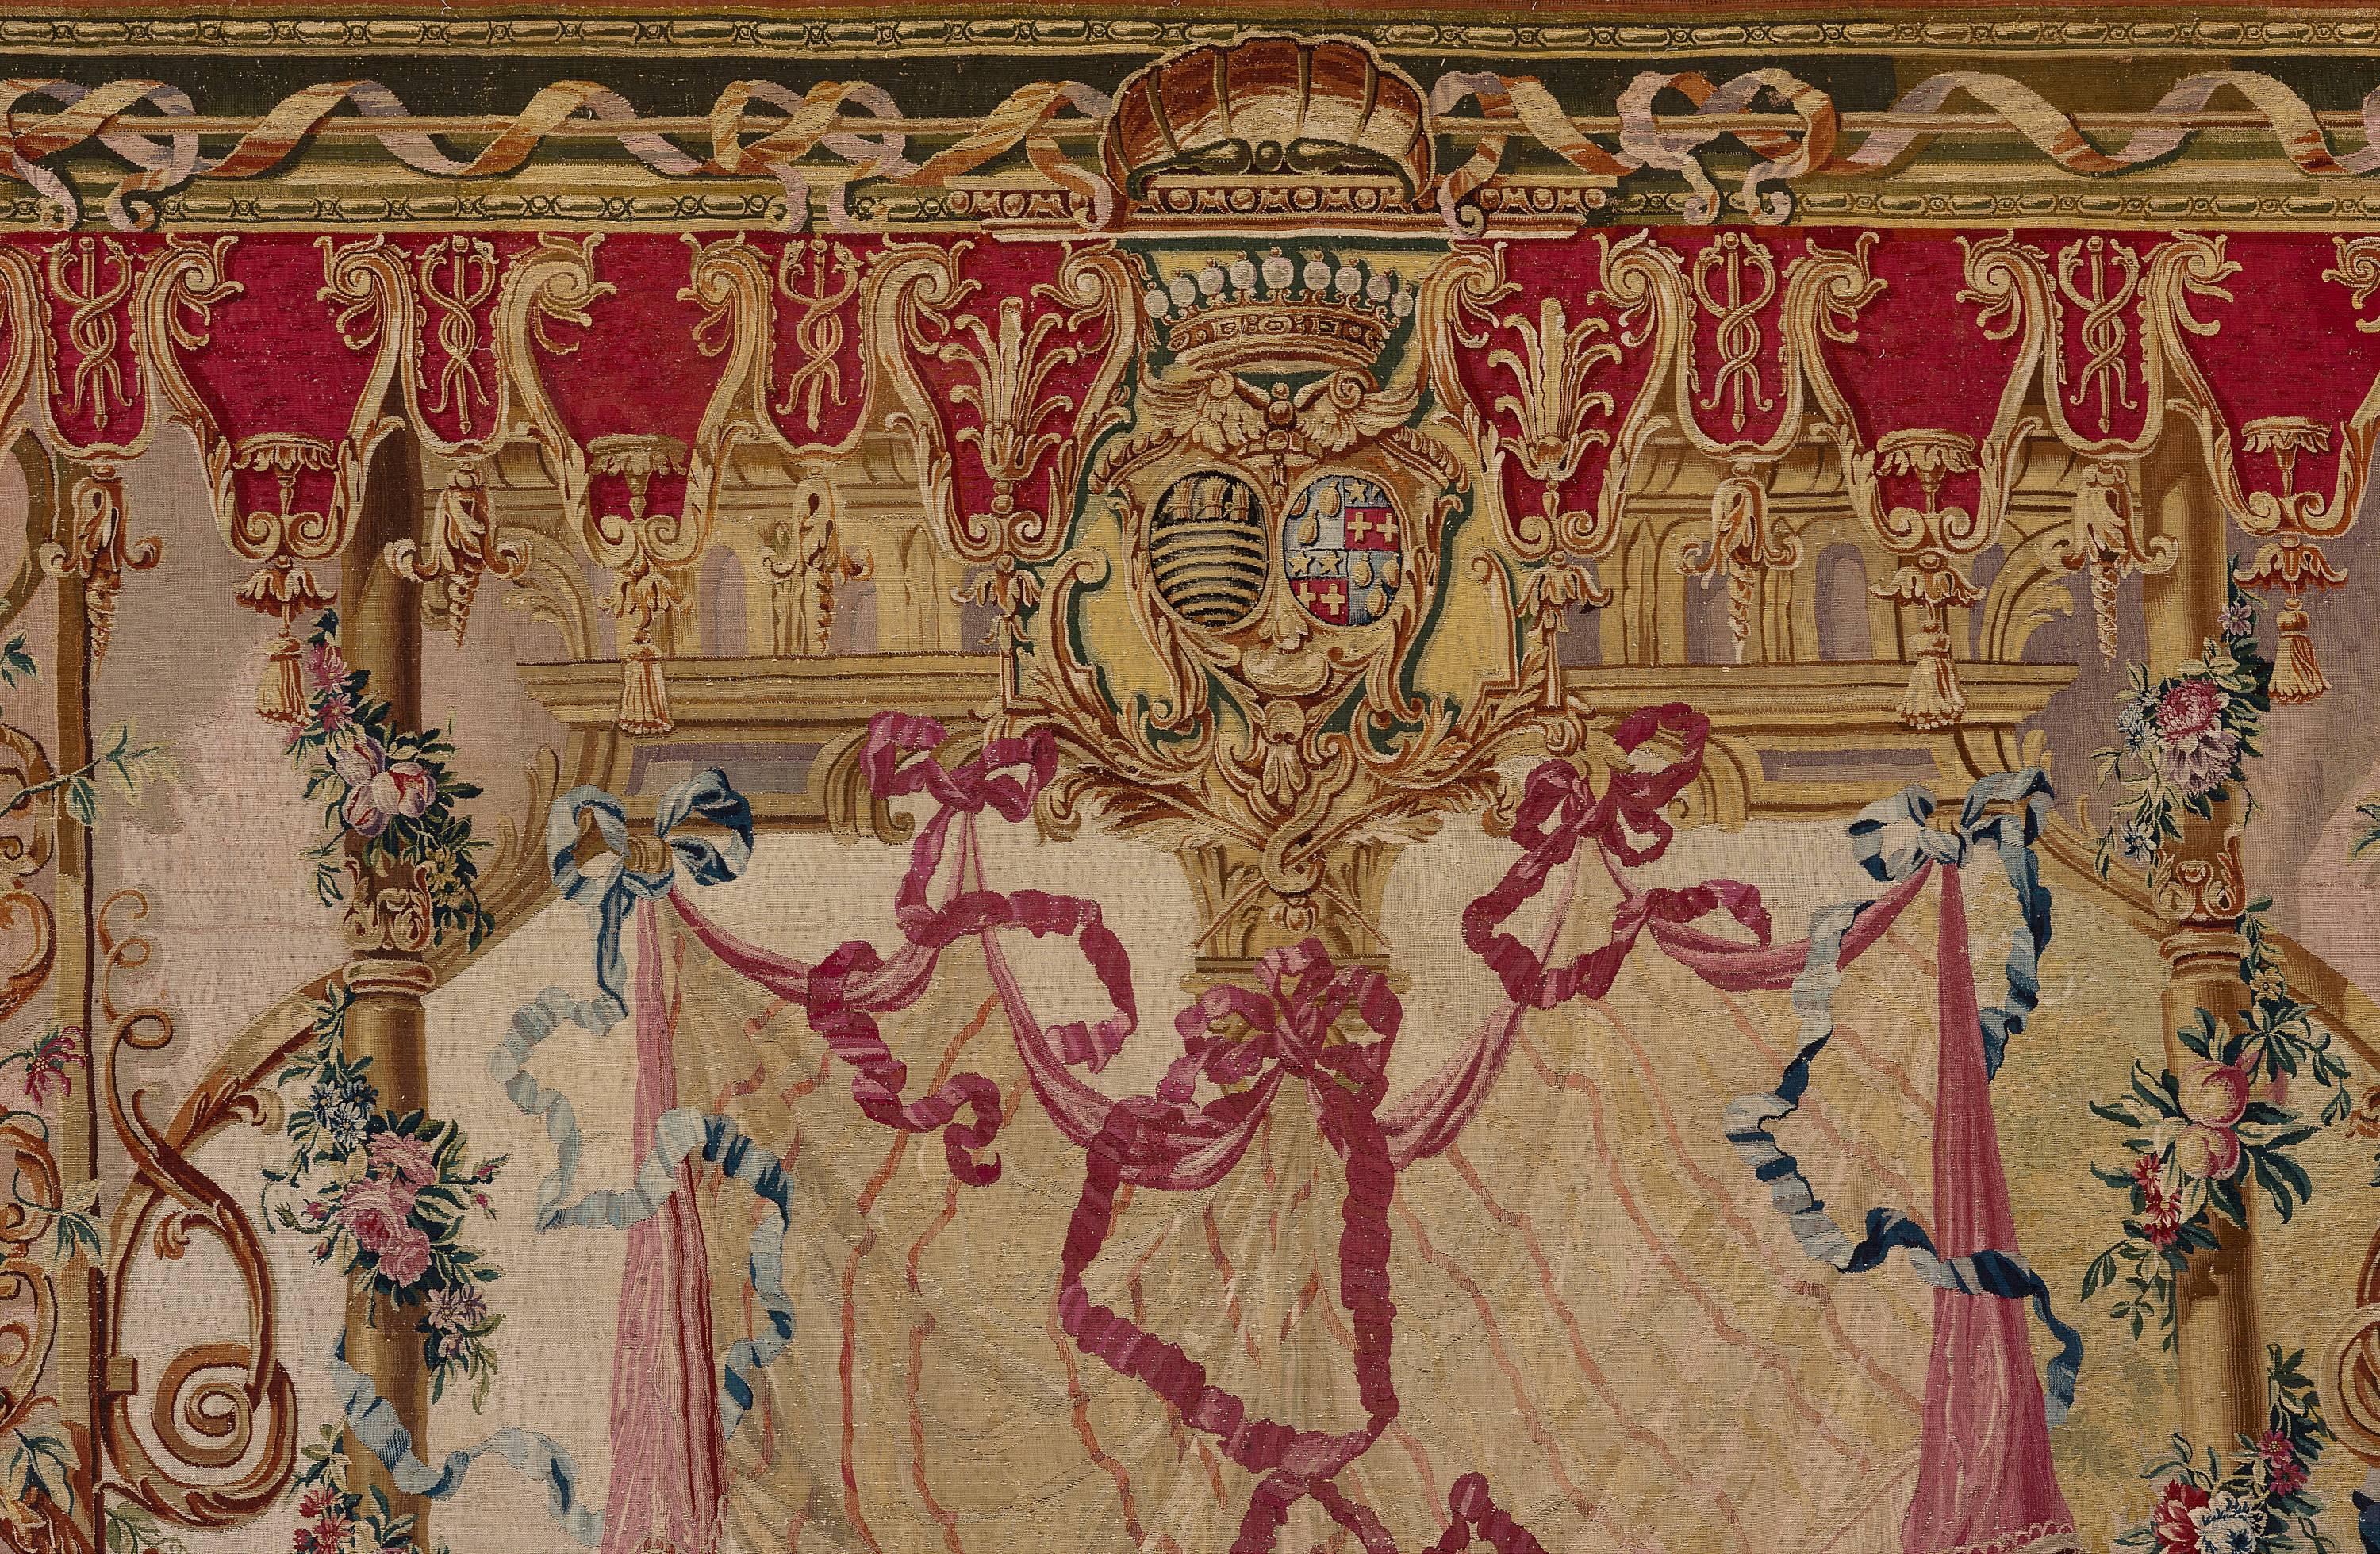 Louis XV tapestry
Royal Manufactory of Beauvais
From the series of the 